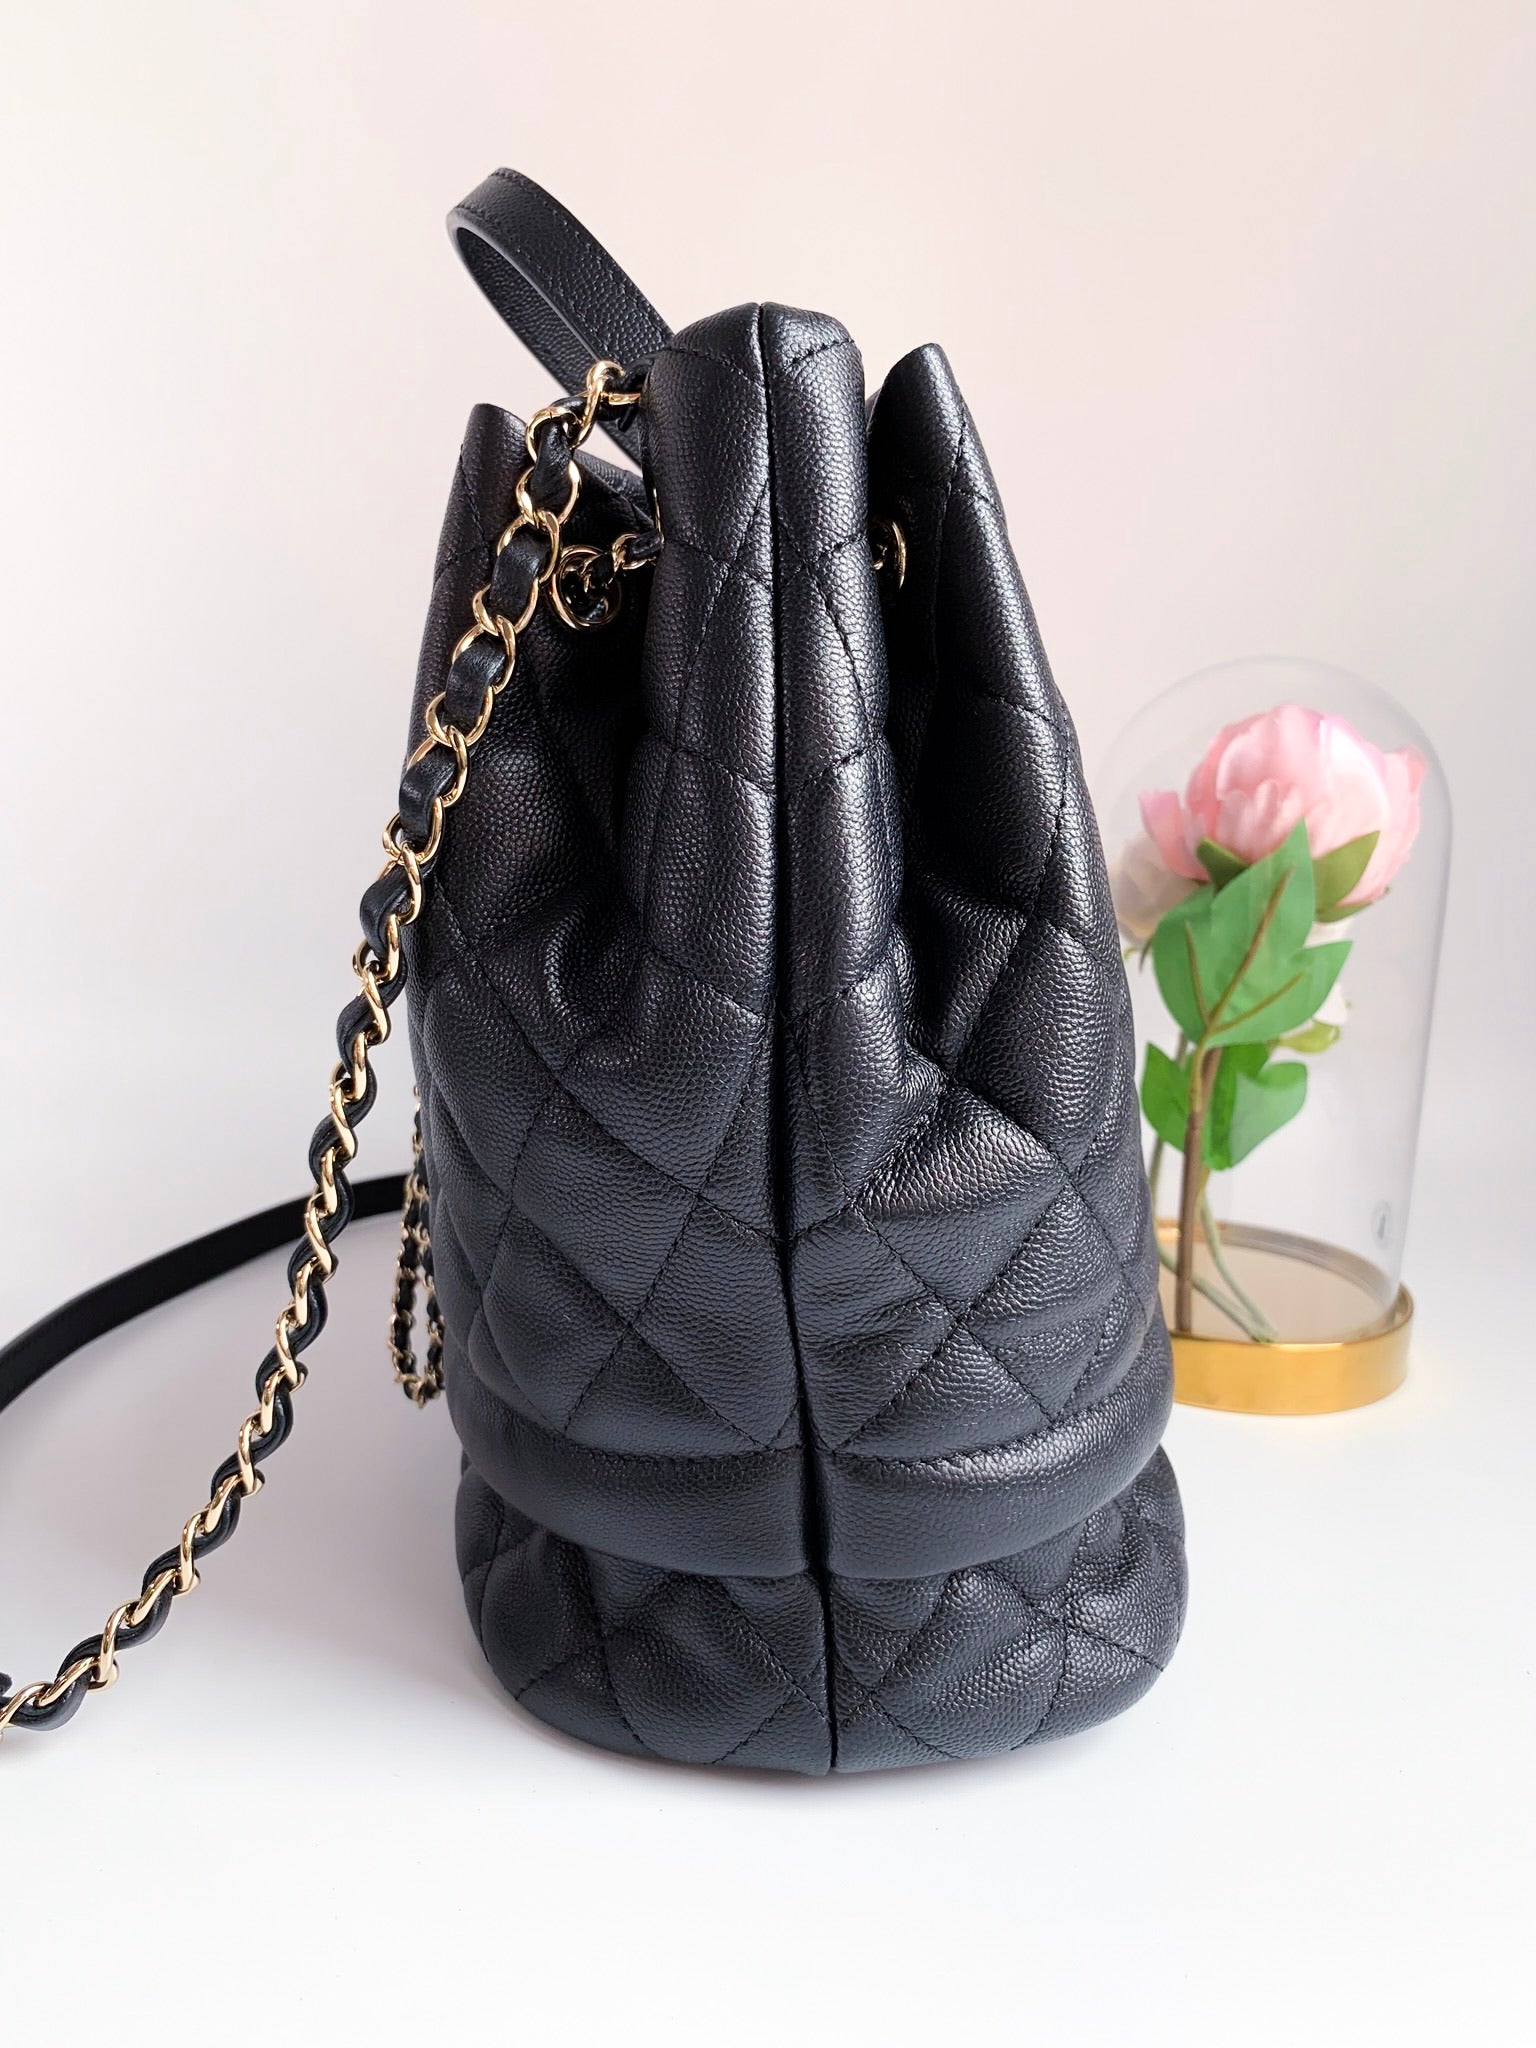 Chanel Caviar Quilted Rolled Up Bucket Drawstring Bag Black Gold